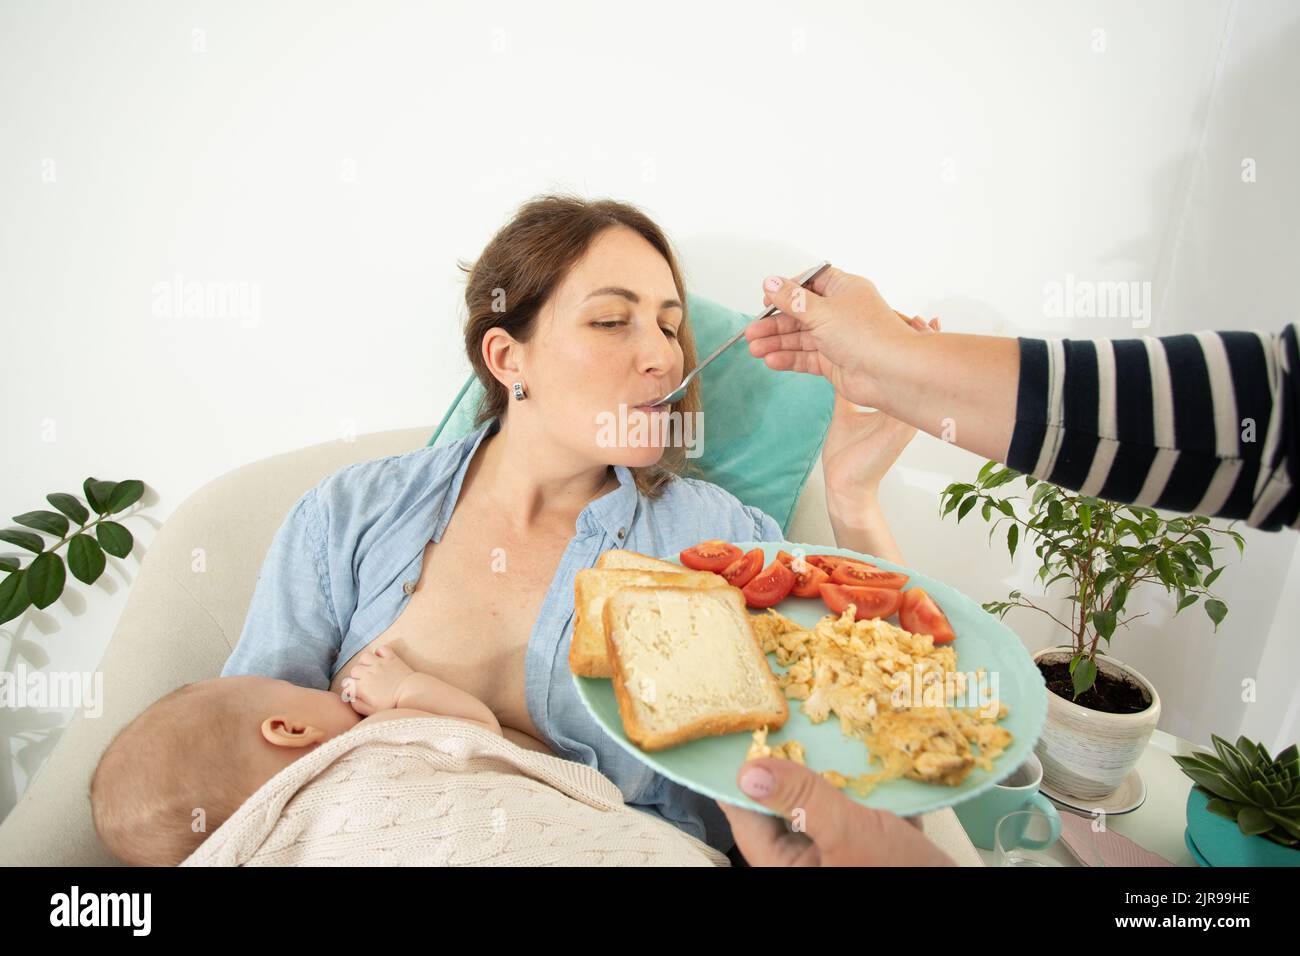 Elder woman helps to eat for new mother when she breastfeeds her baby. Motherhood support Stock Photo